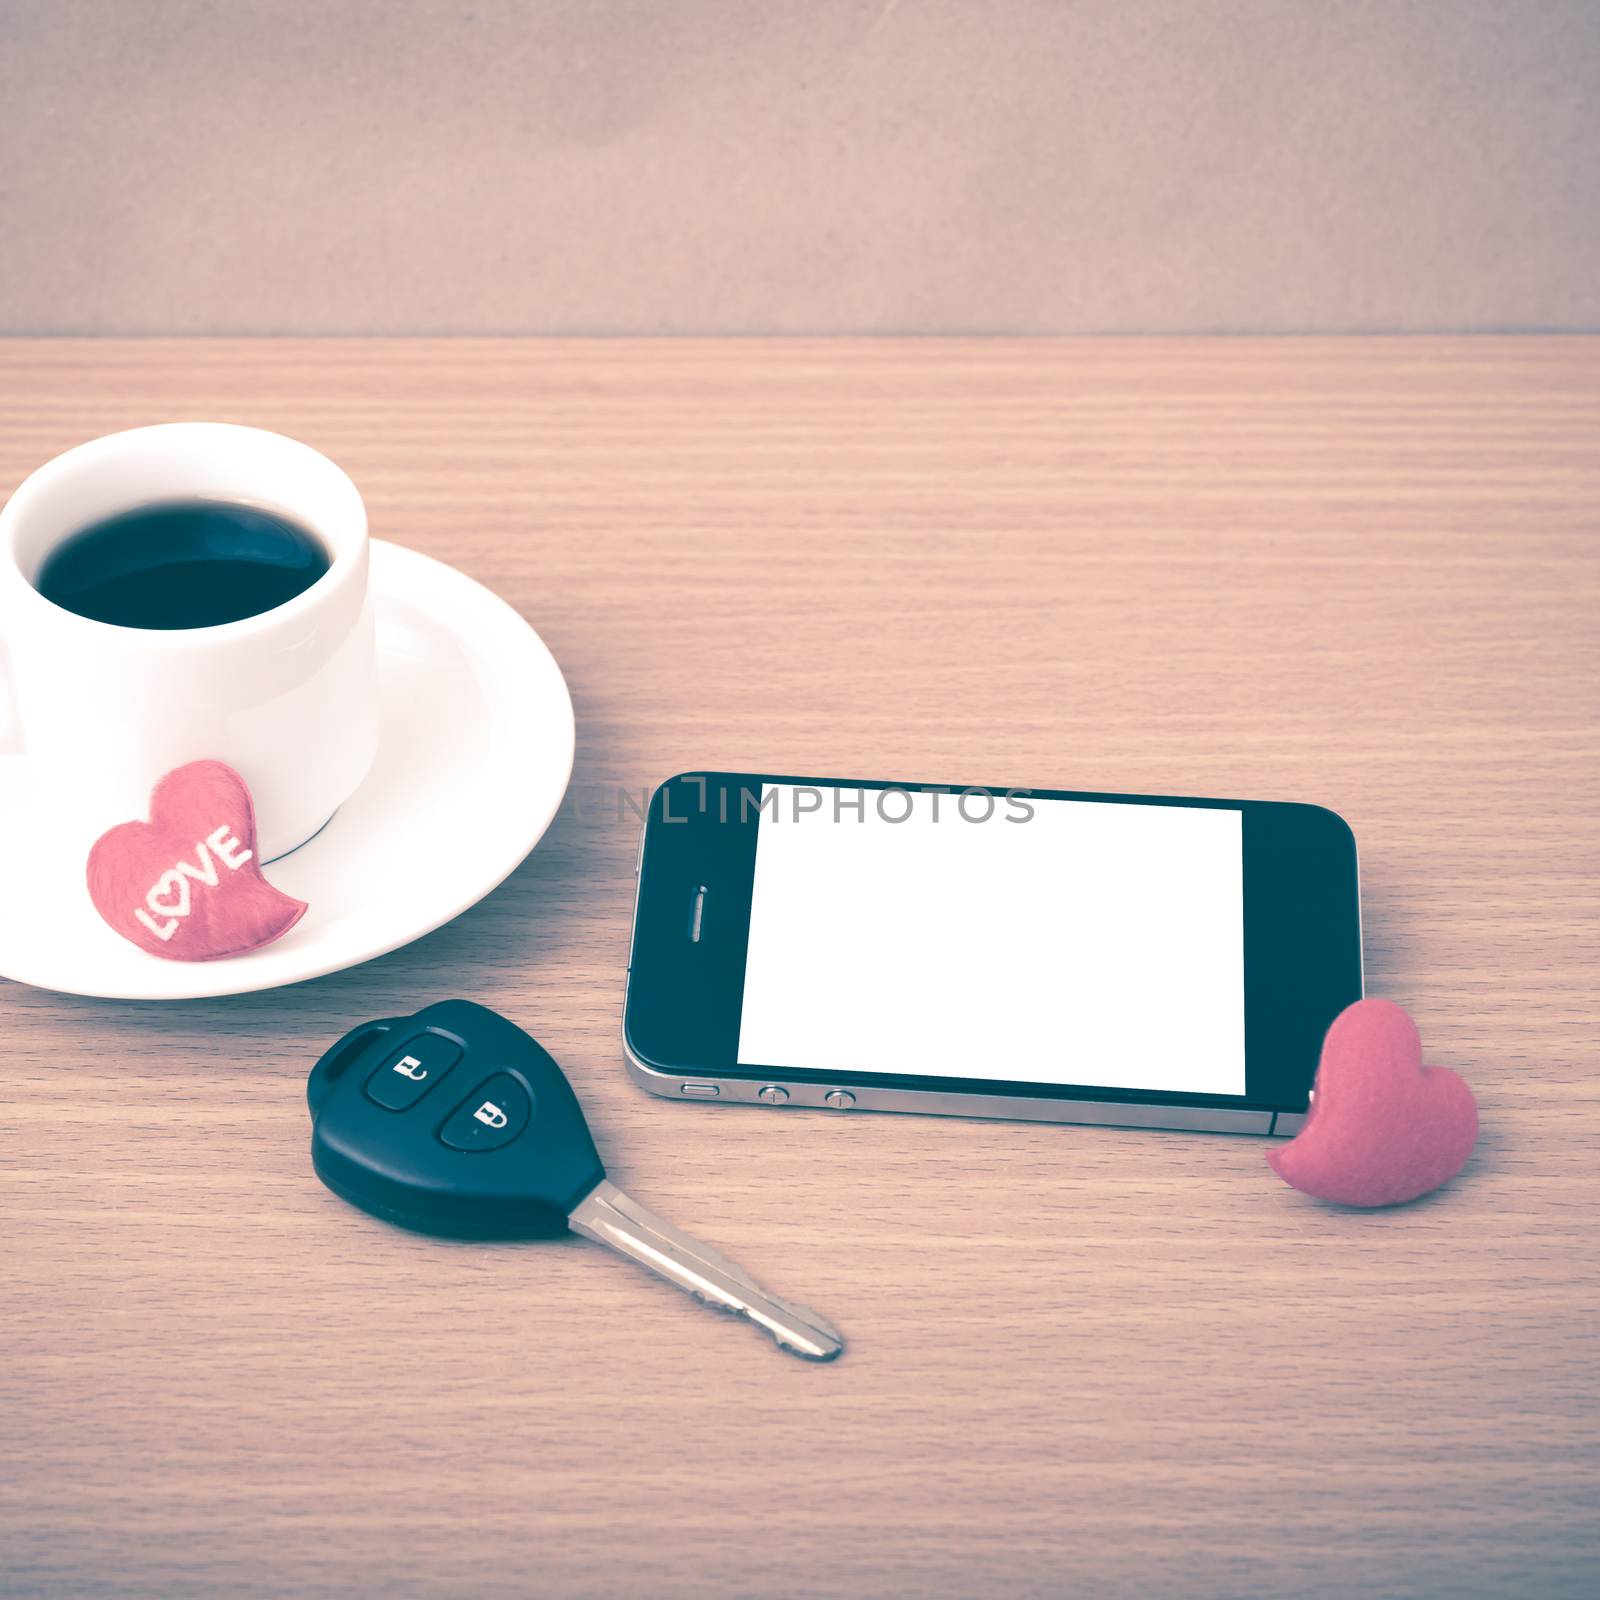 coffee phone car key and heart on wood table background vintage style